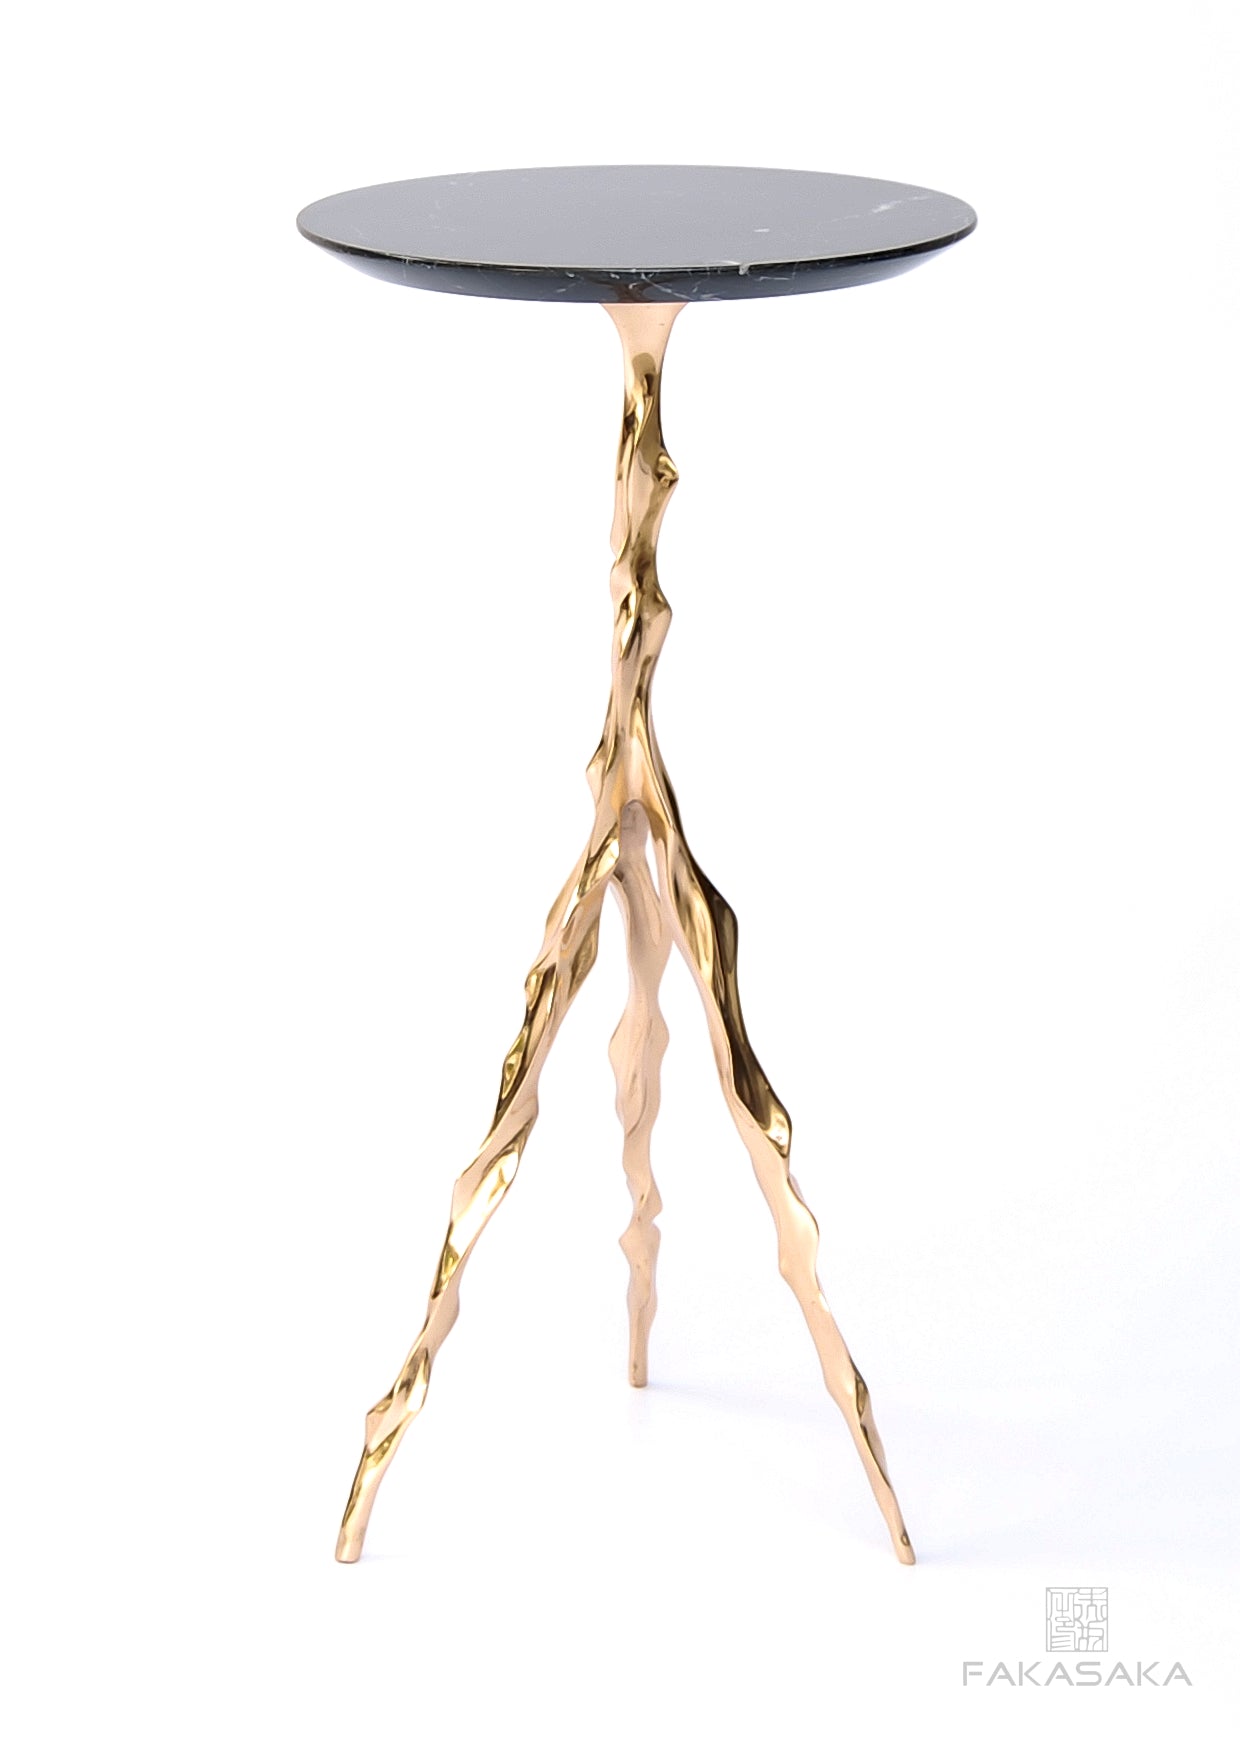 ETTA DRINK TABLE<br><br>NERO MARQUINA MARBLE<br>POLISHED BRONZE